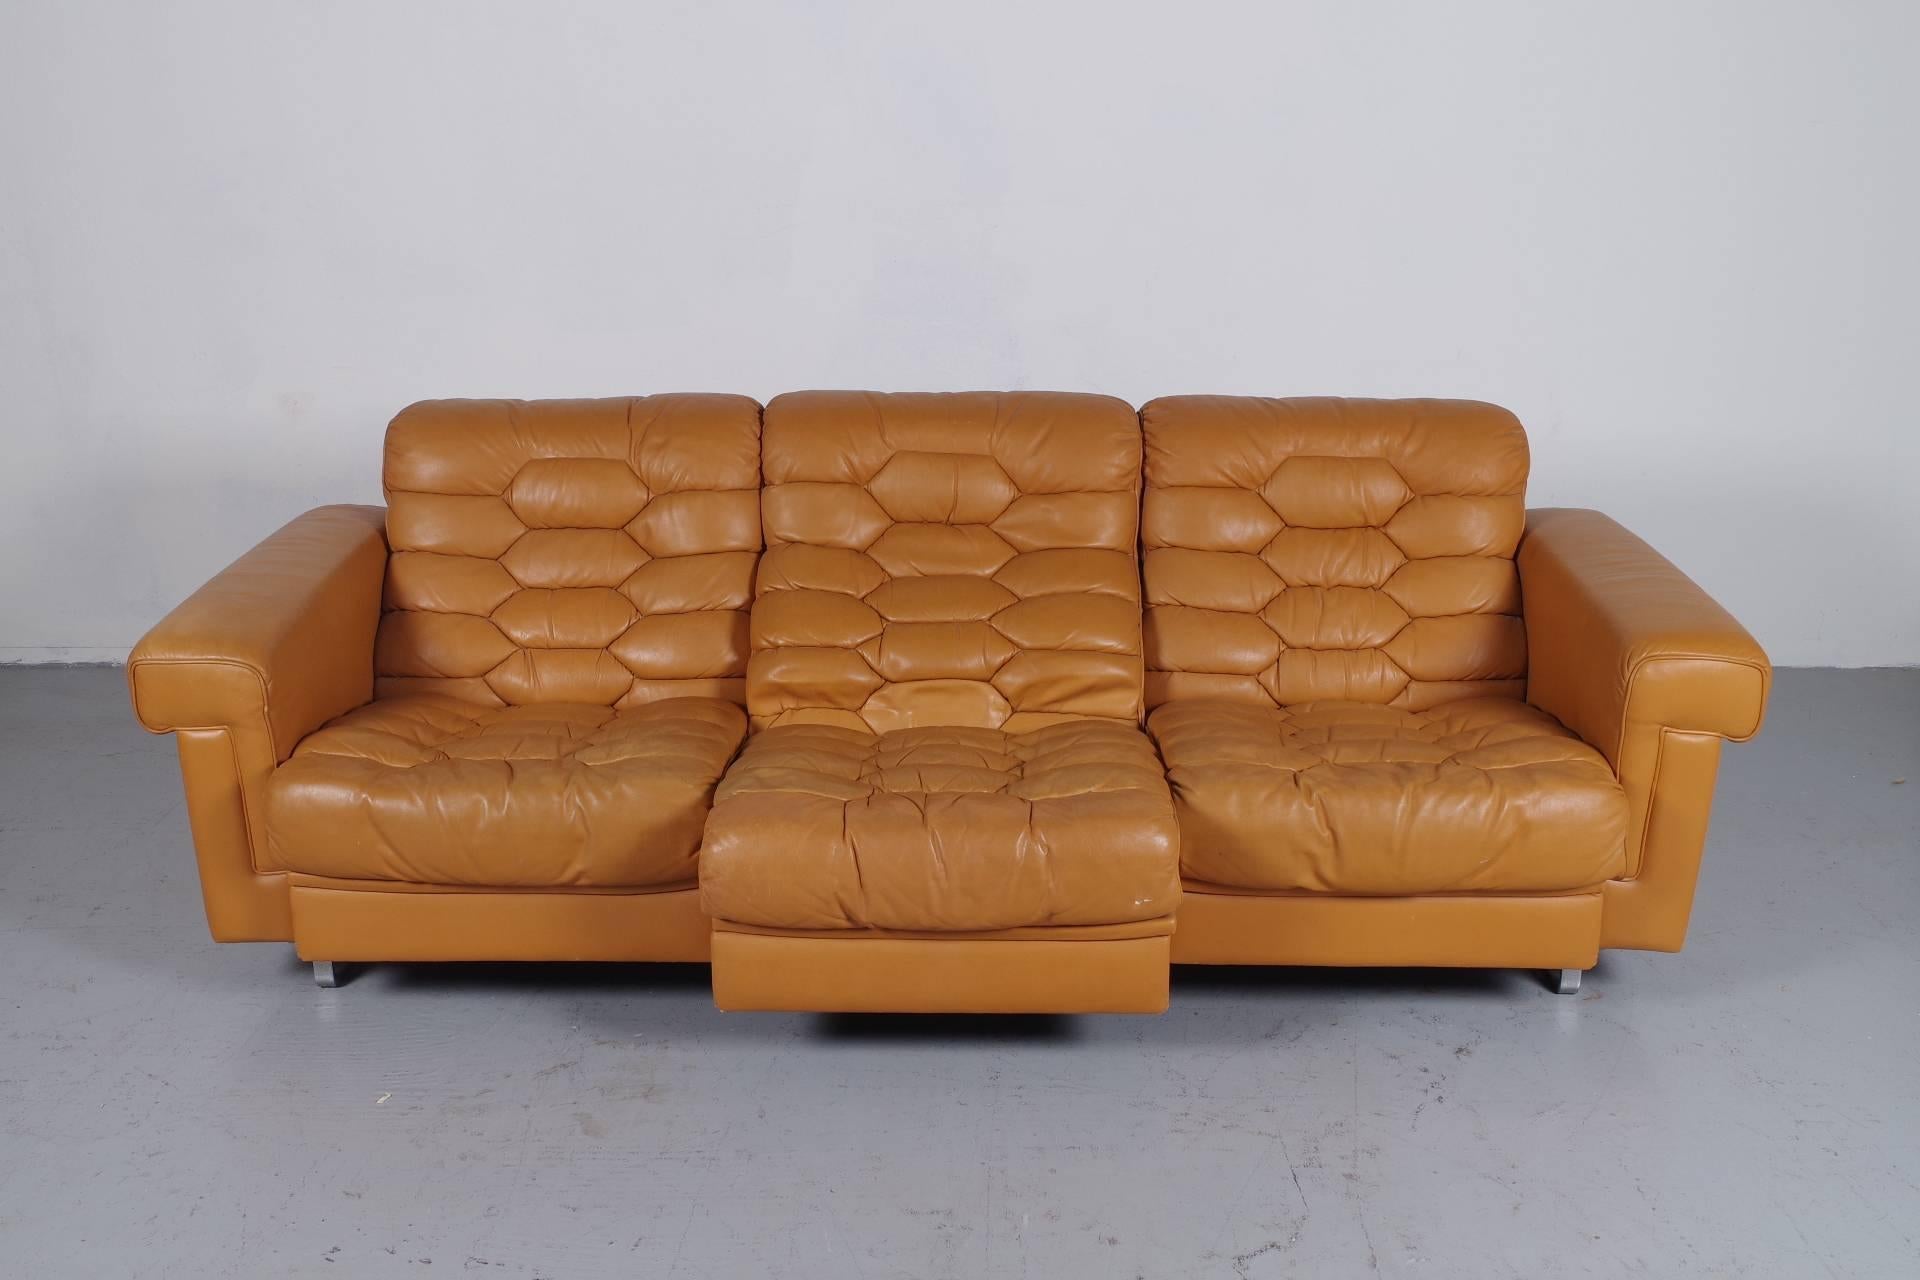 Beautiful three-seat from De Sede of Switzerland with a honeycomb structure in leather. This sofa has three extensible seats for more comfort. De Sede is famous for his construction quality, leather quality and design. The DS-P is one of their